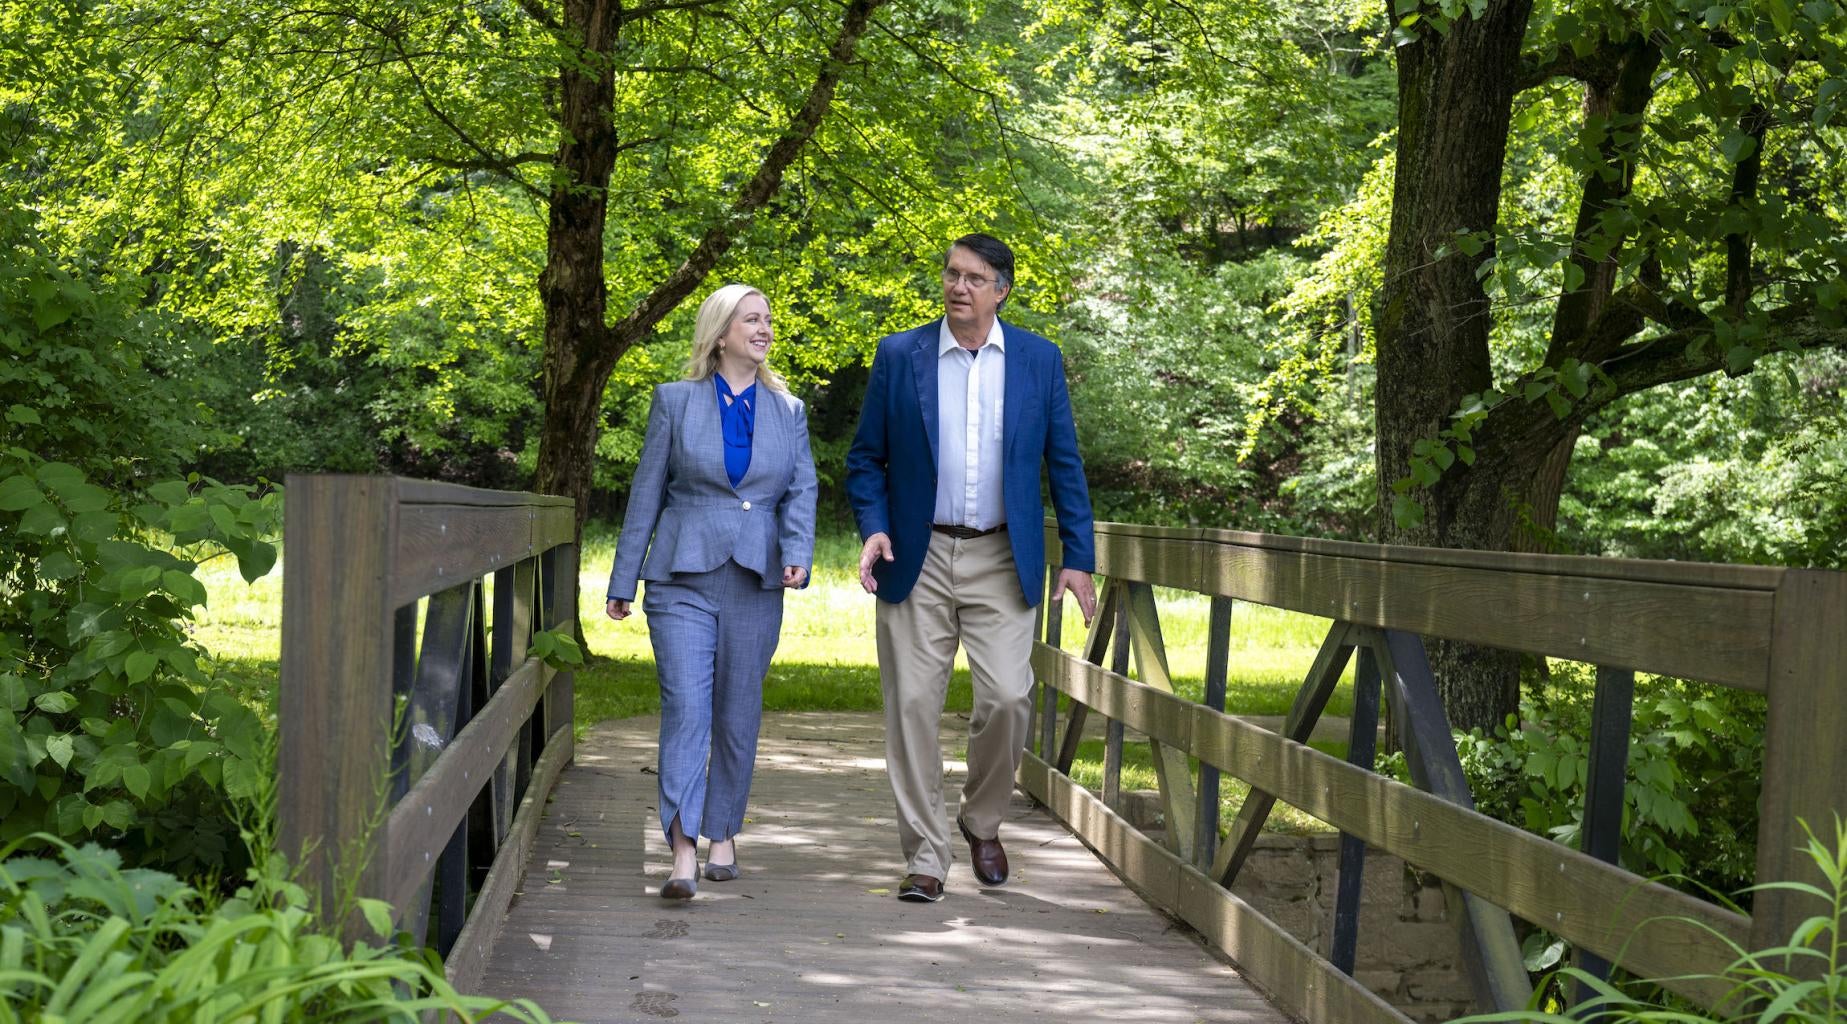 "Dean Nicola Foote and President Robert Gregerson cross bridge together on Greensburg's campus"